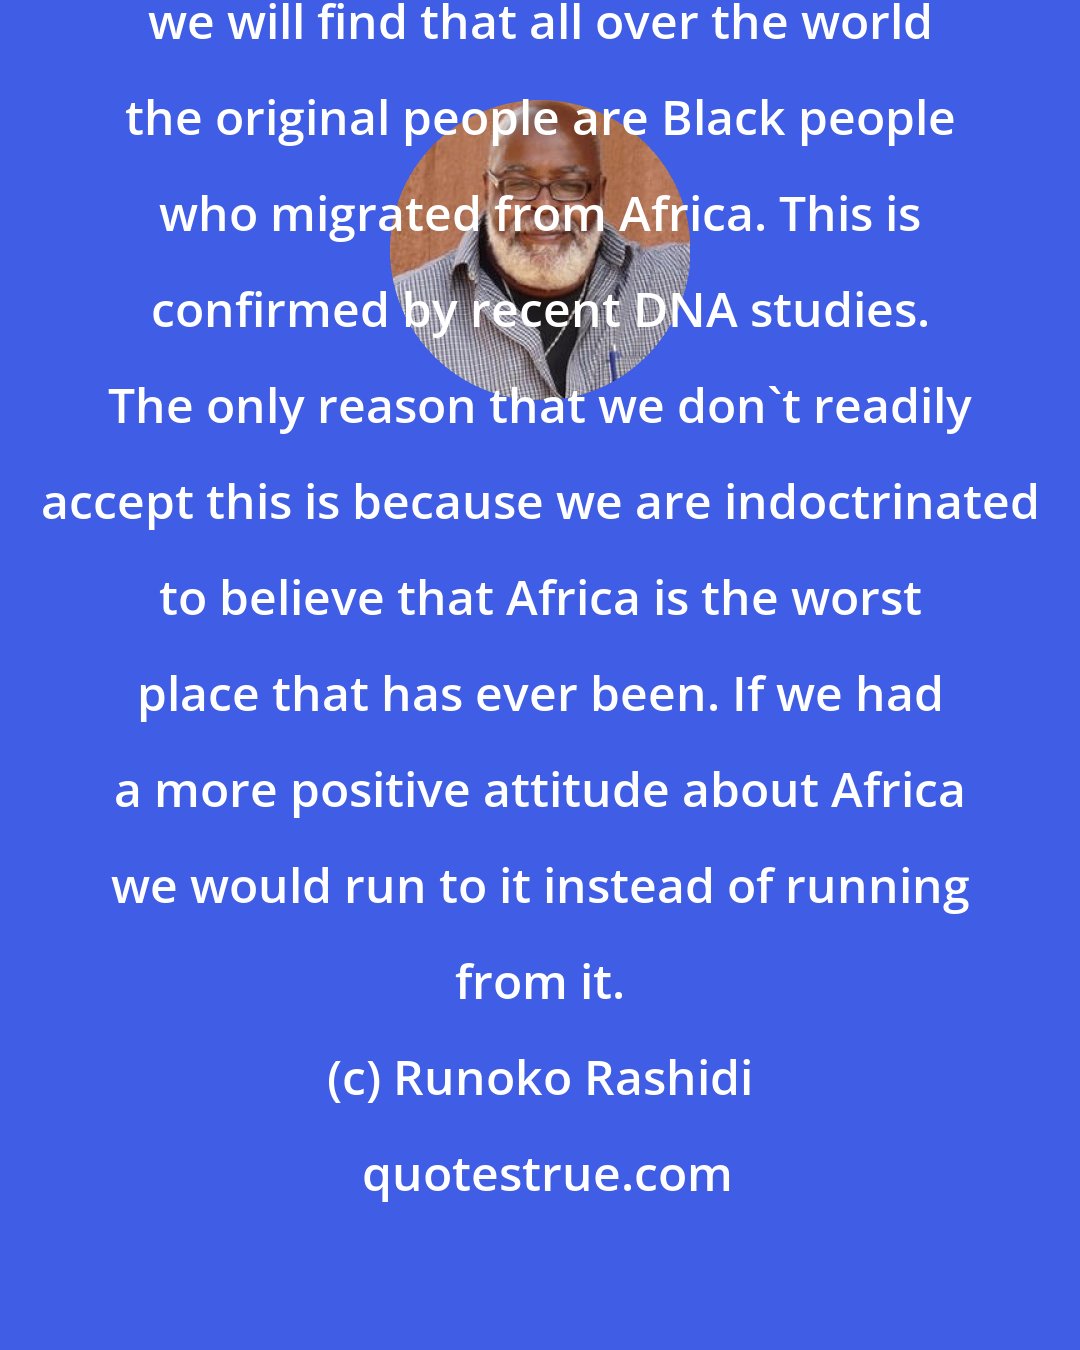 Runoko Rashidi: If we study history and anthropology we will find that all over the world the original people are Black people who migrated from Africa. This is confirmed by recent DNA studies. The only reason that we don't readily accept this is because we are indoctrinated to believe that Africa is the worst place that has ever been. If we had a more positive attitude about Africa we would run to it instead of running from it.